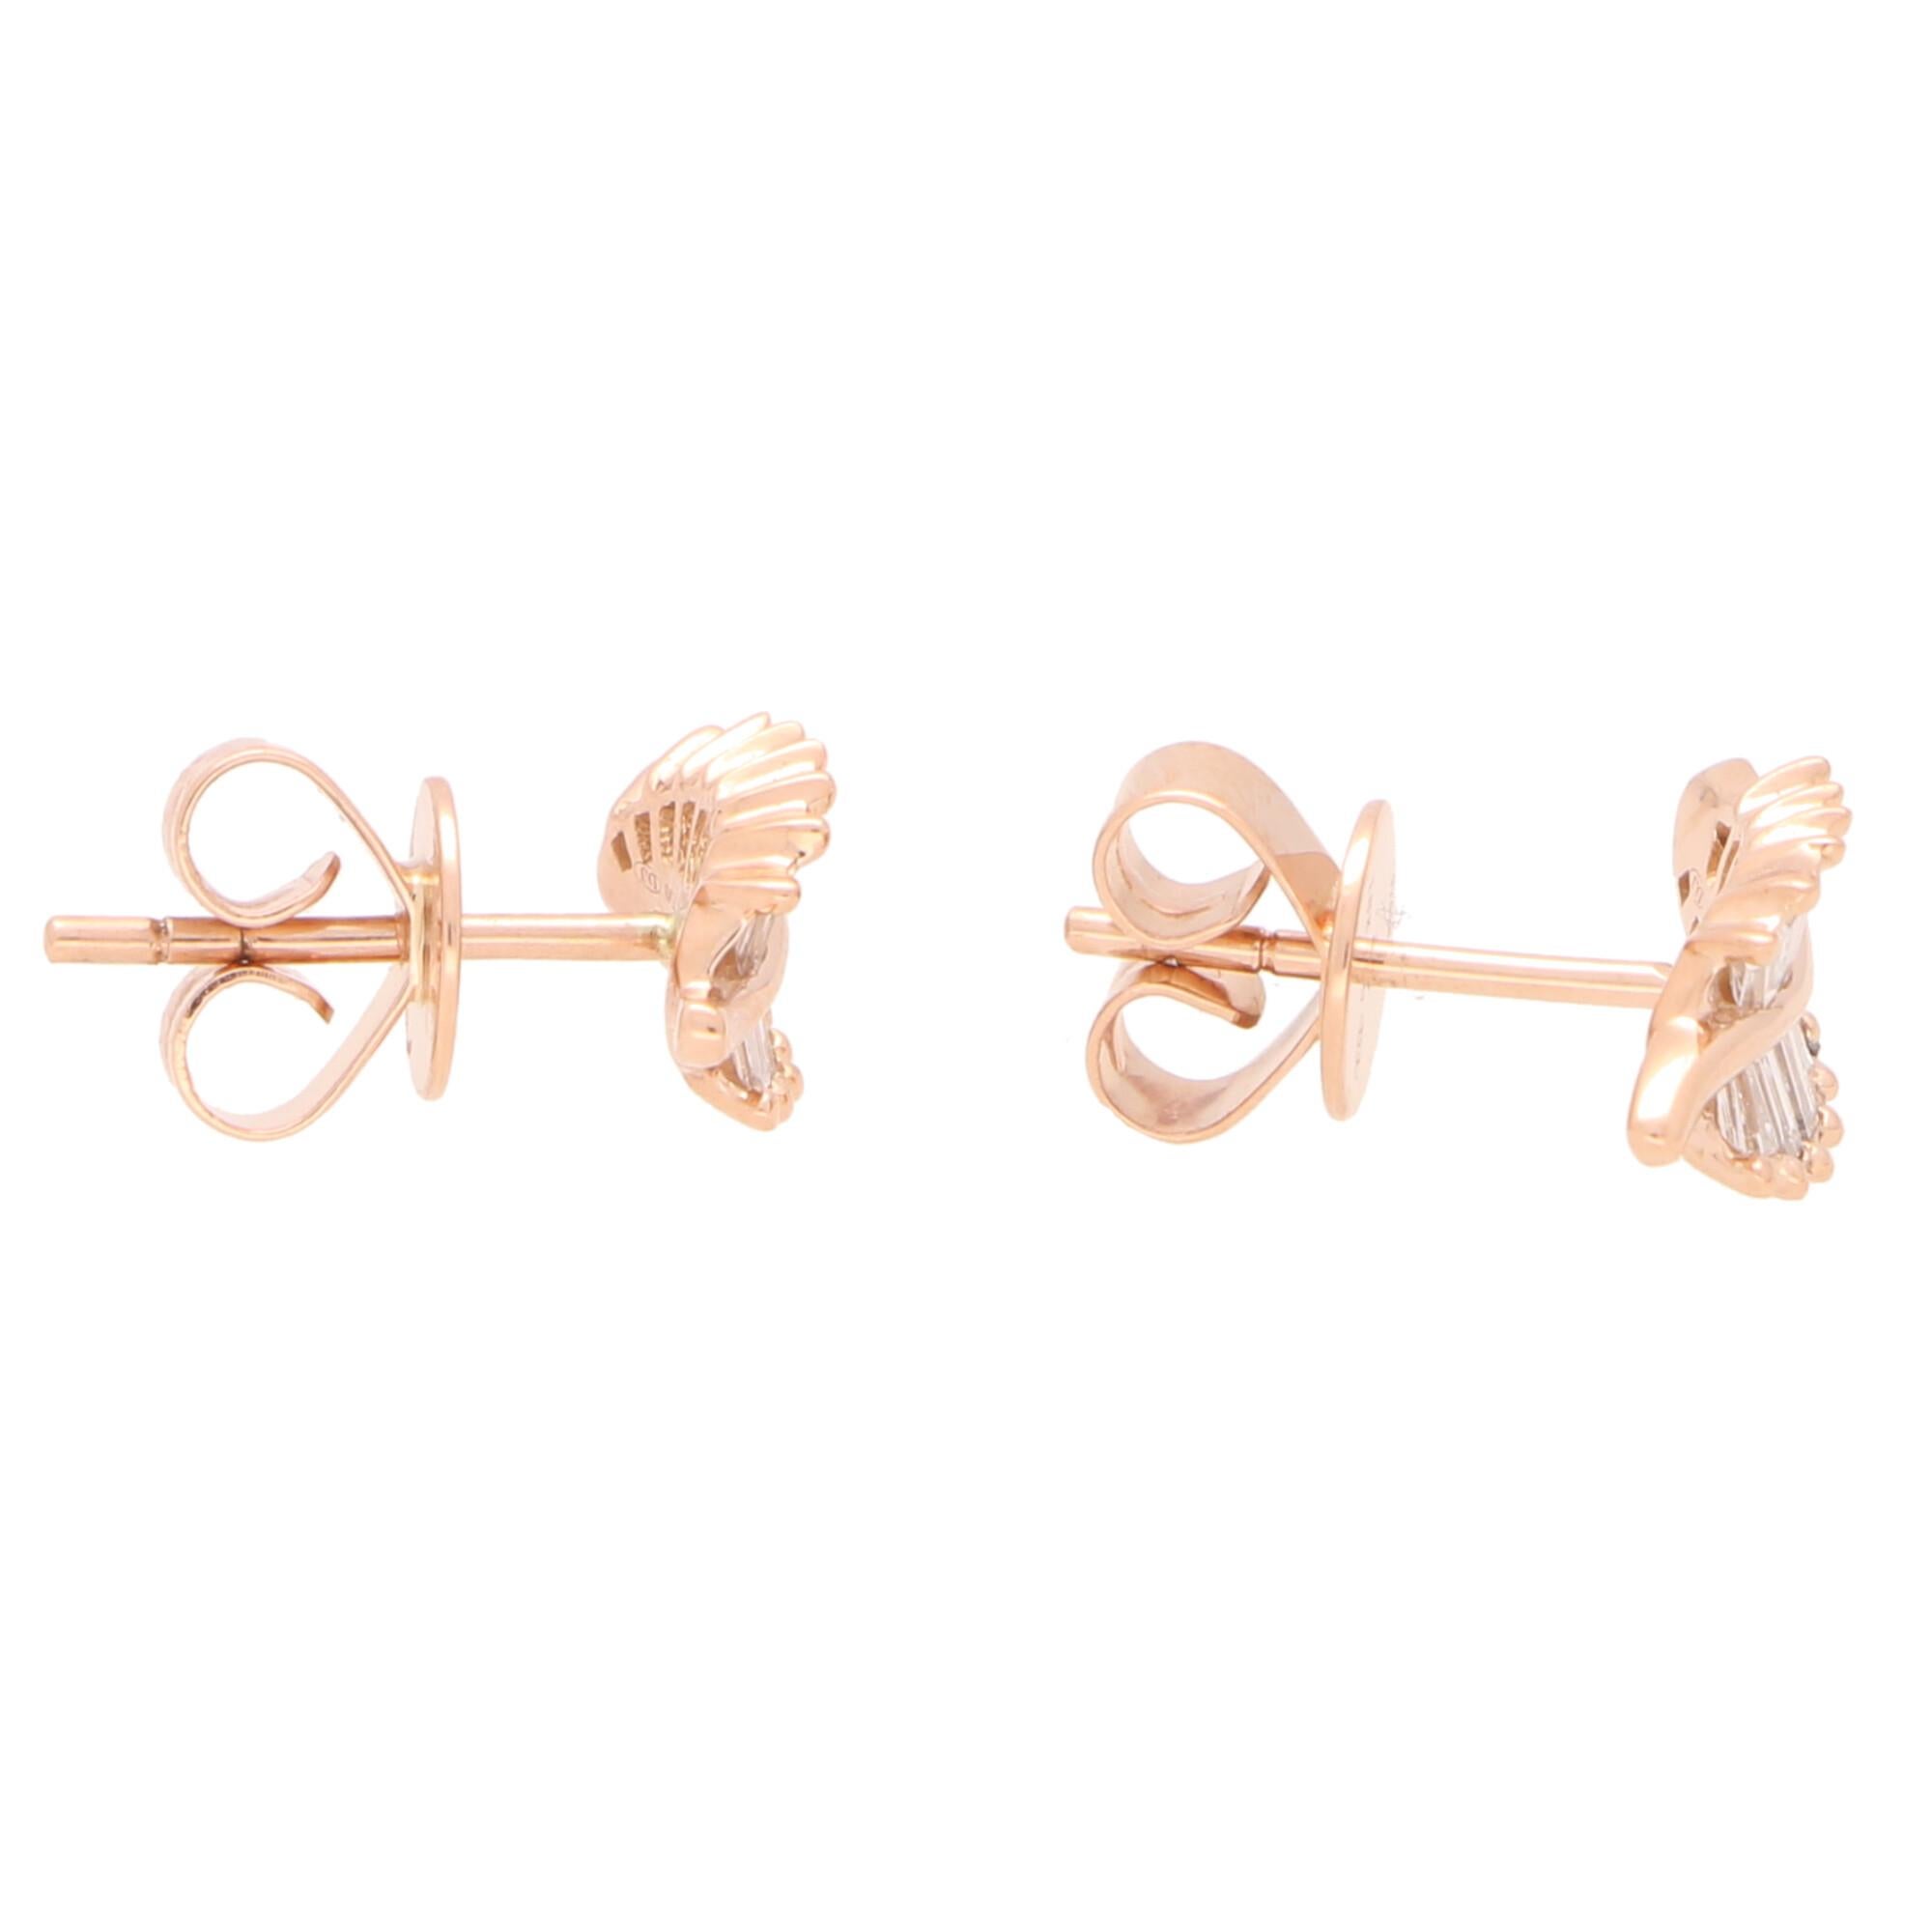  A lovely little pair of diamond leaf stud earrings set in 18k rose gold.

These beautiful little studs are each individually set with 13 tapered baguette cut diamonds claw set to depict the grooves of a natural leaf. Due to the design these studs